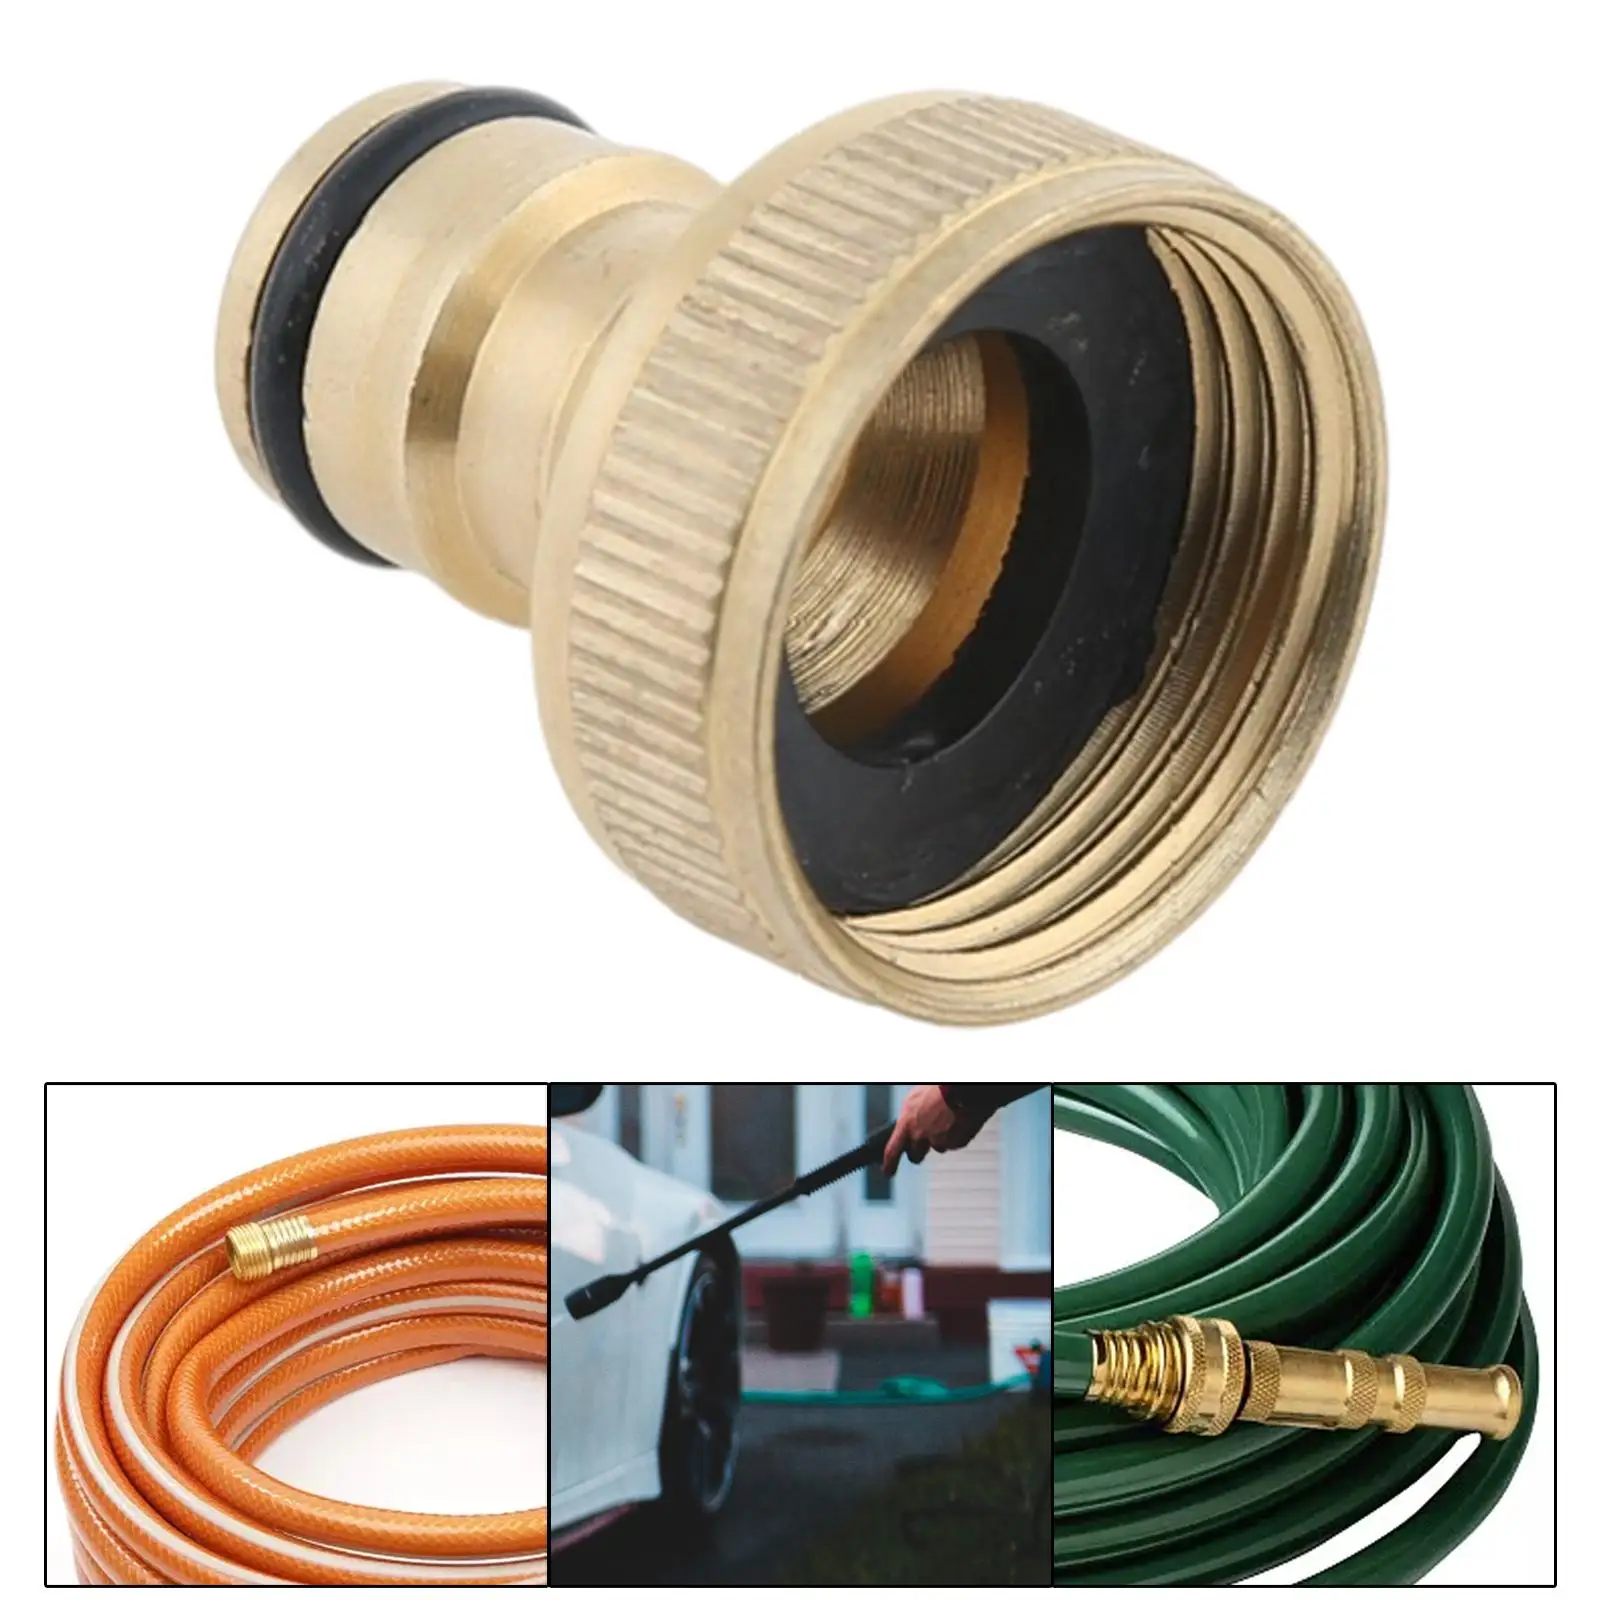 Brass Hose Adapter Connect and Disconnect High Pressure Washer Quick Connector for Pressure Washer